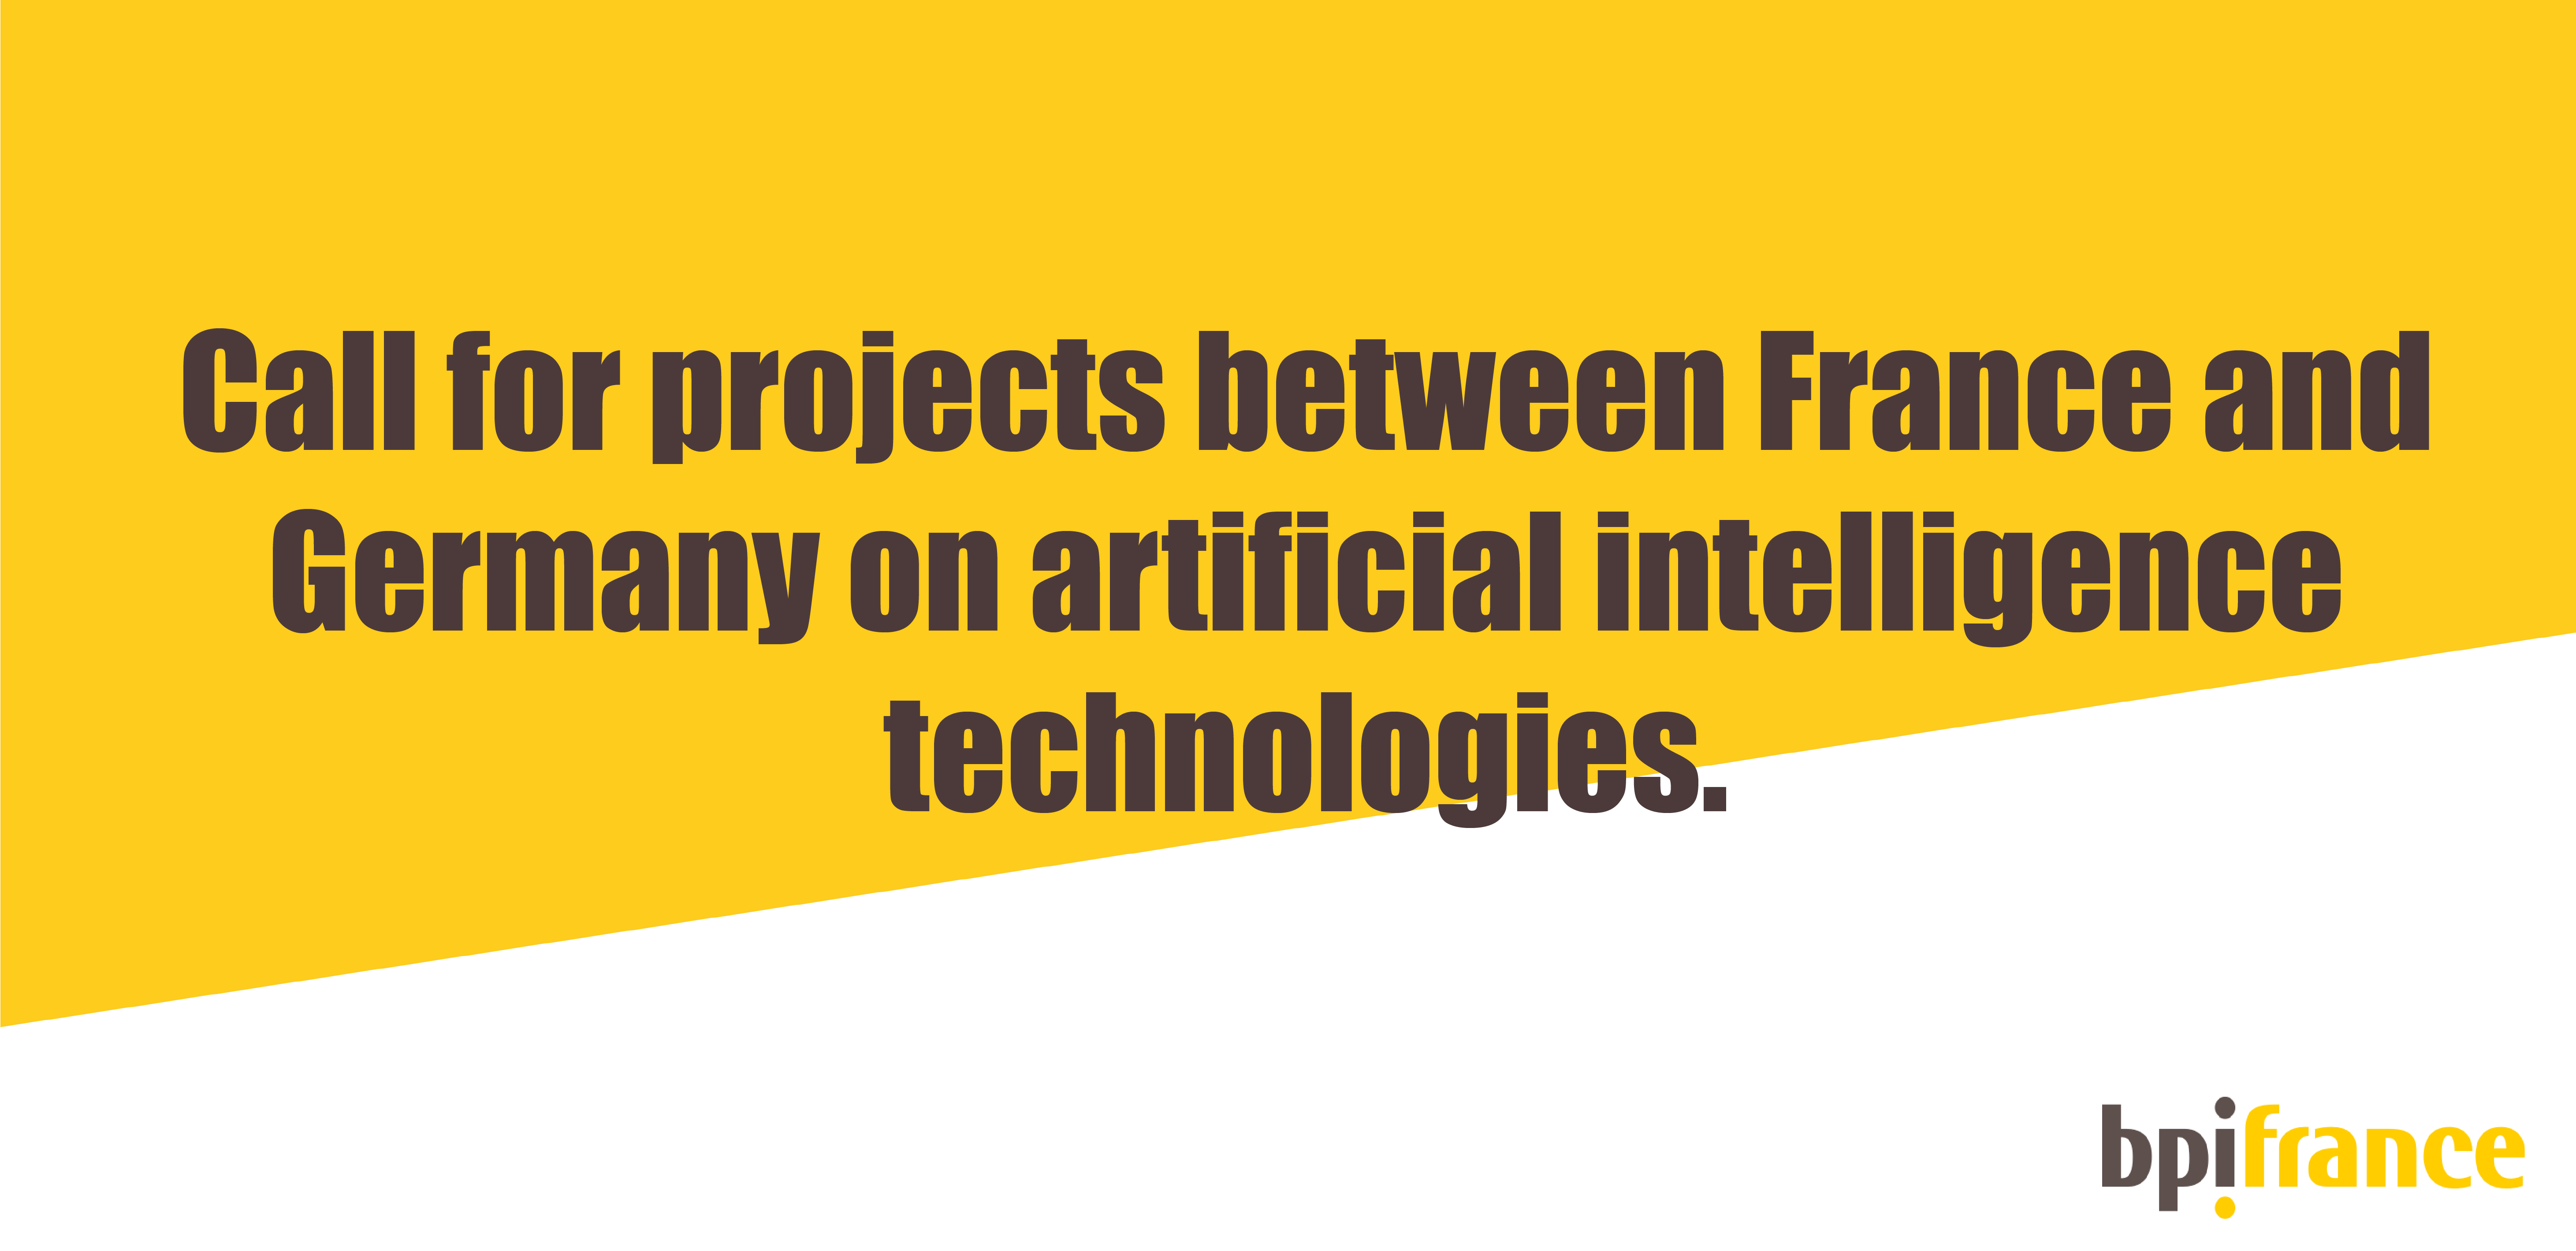 Call-for-projects-between-France-and-Germany-on-artificial-intelligence-technologies